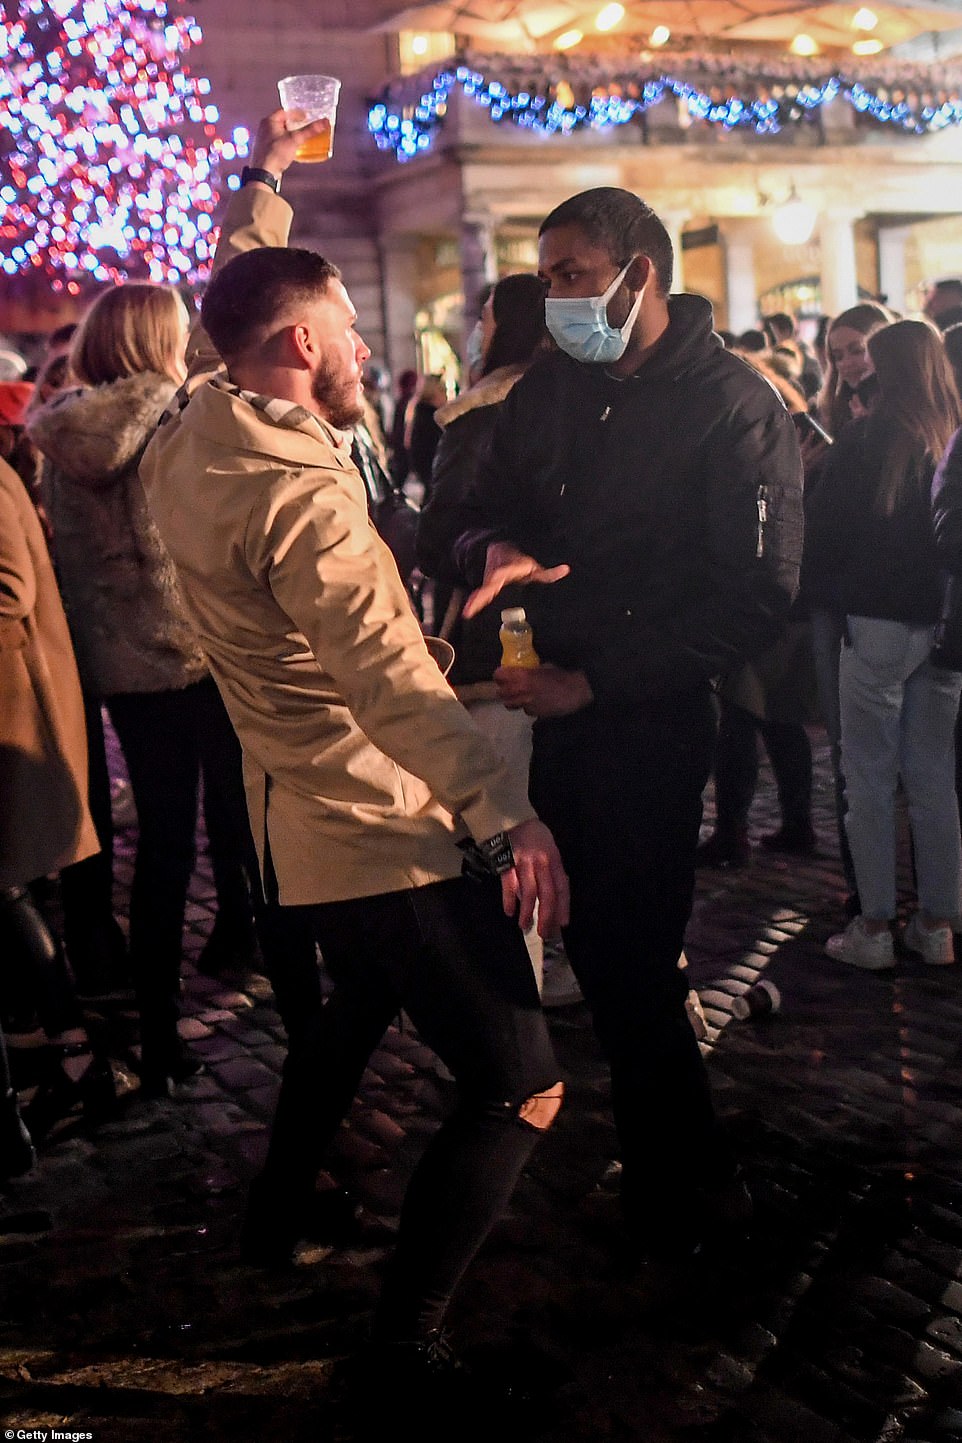 A man holding a pint dances in front of a man wearing a mask in Covent Garden in London's West End on December 5